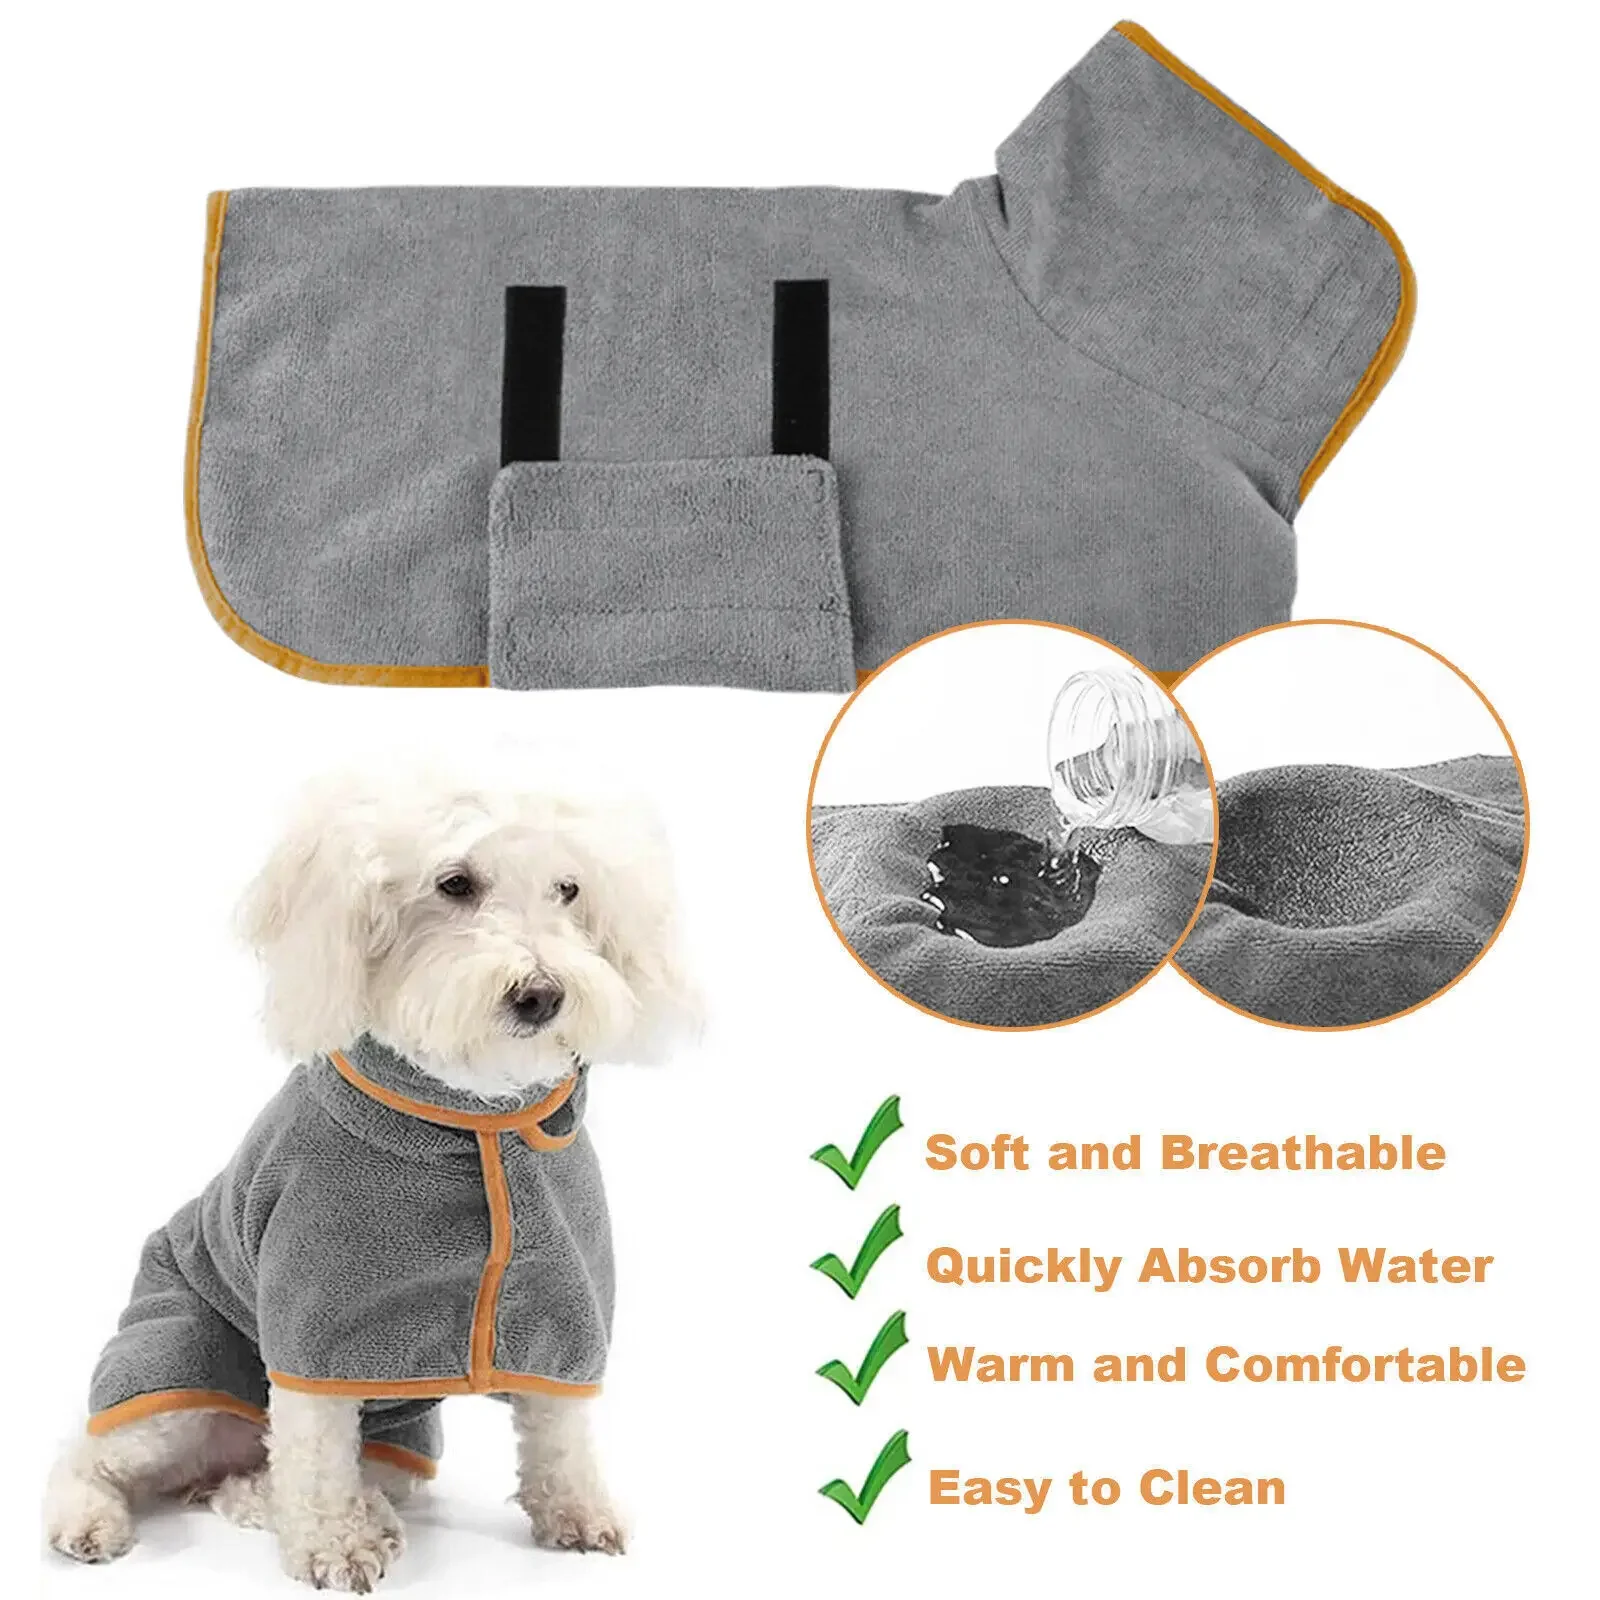 

Pet Dog Bathrobe Drying Coat Clothes Microfiber Absorbent Beach Towel for Large Medium Small Dogs Cats Fast Dry Dog Accessories